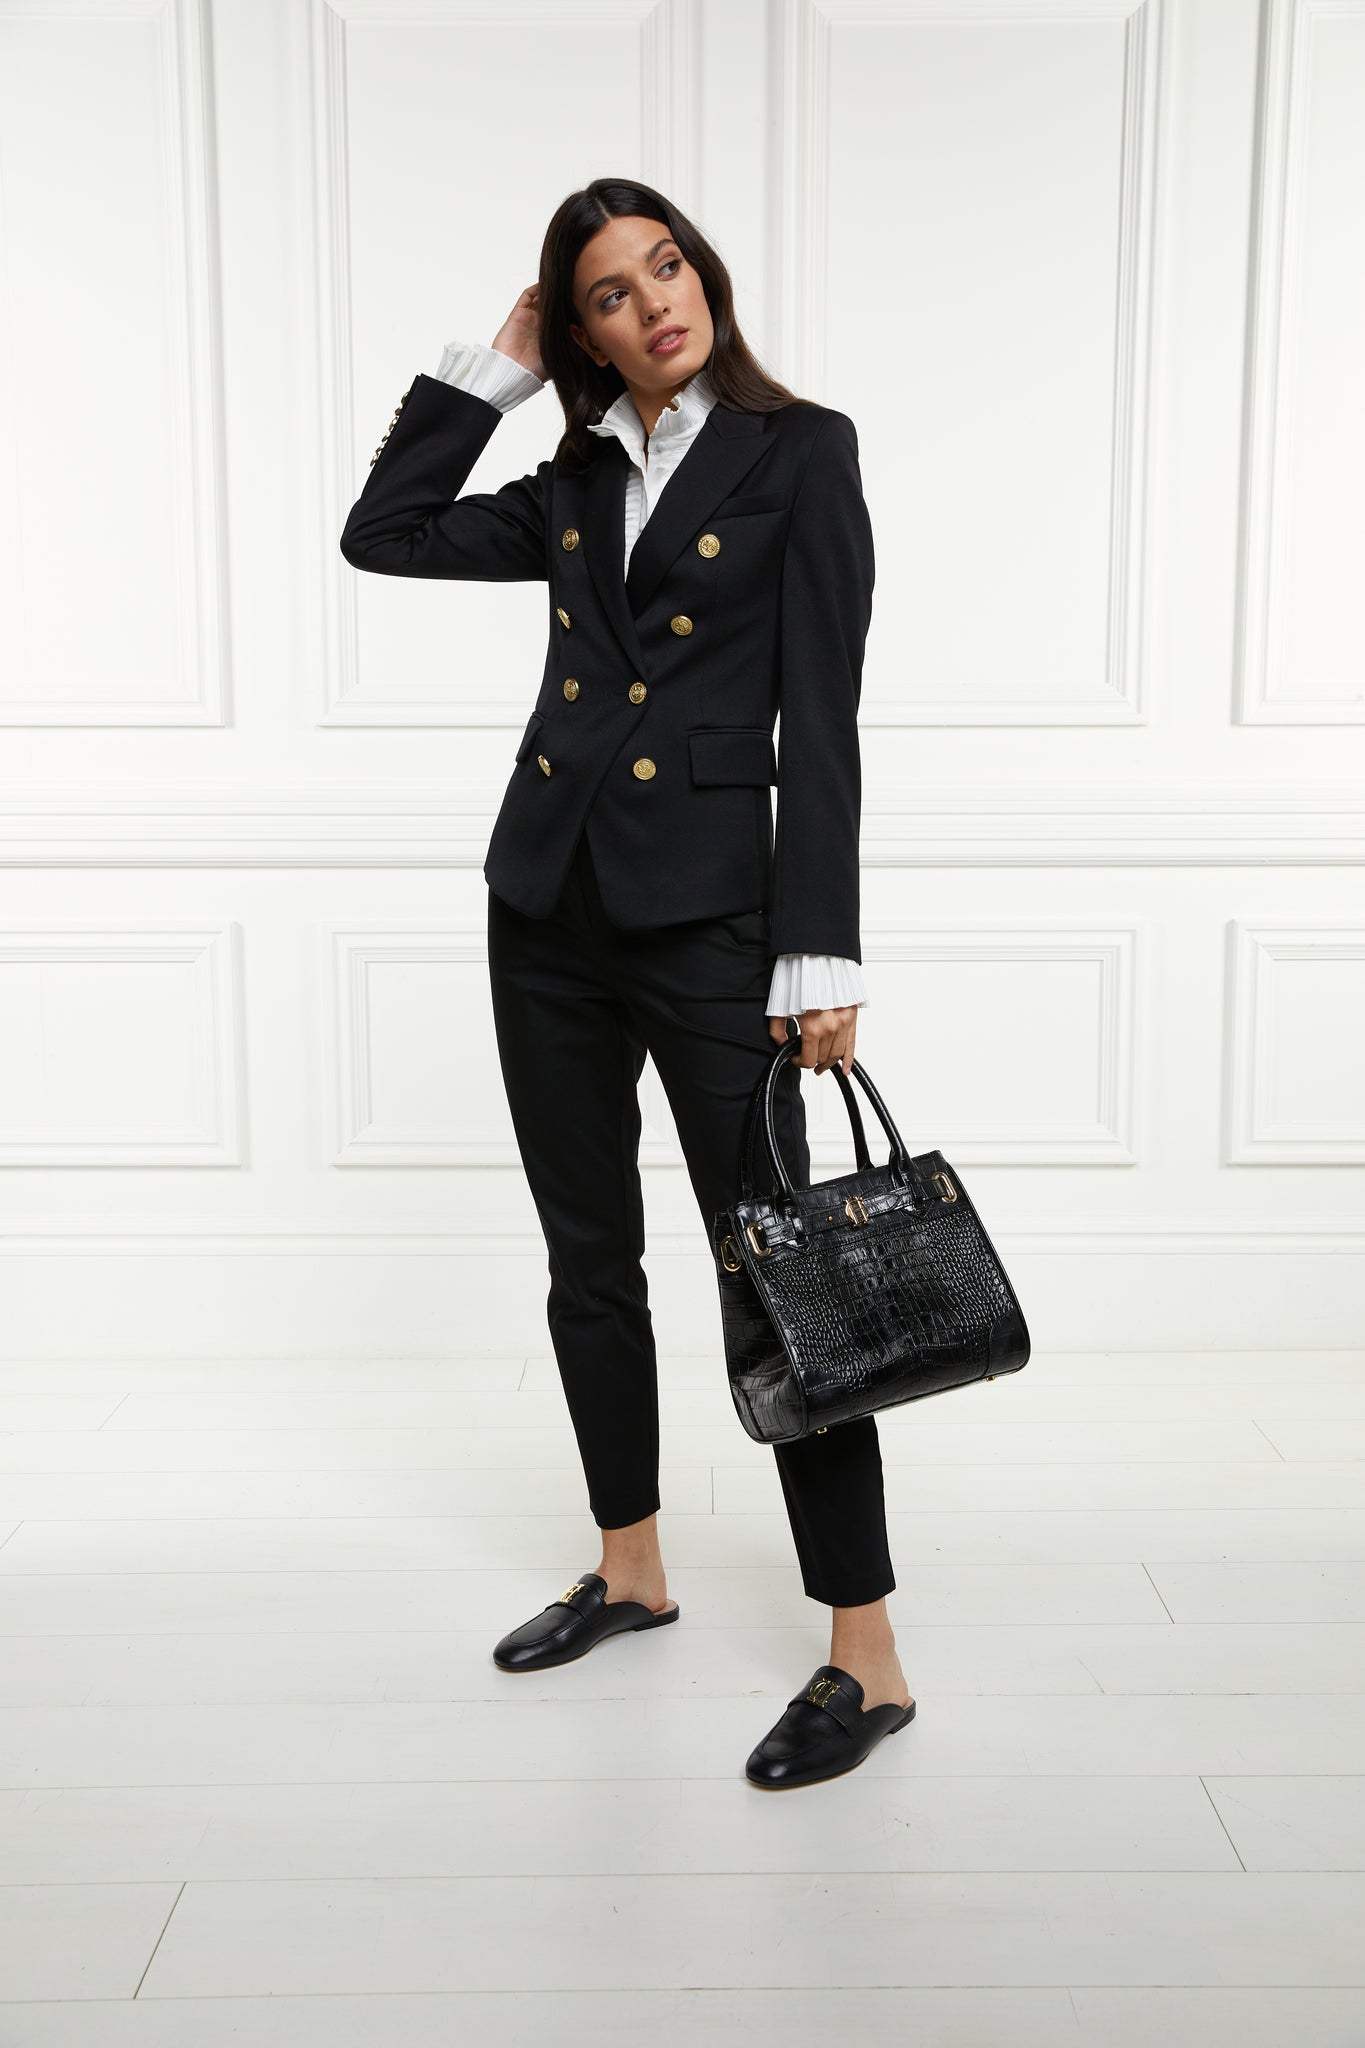 British made double breasted blazer that fastens with a single button hole to create a more form fitting silhouette with two pockets and gold button detailing this blazer is made from black barathea worn with white shirt black tailored trousers and a black tote bag